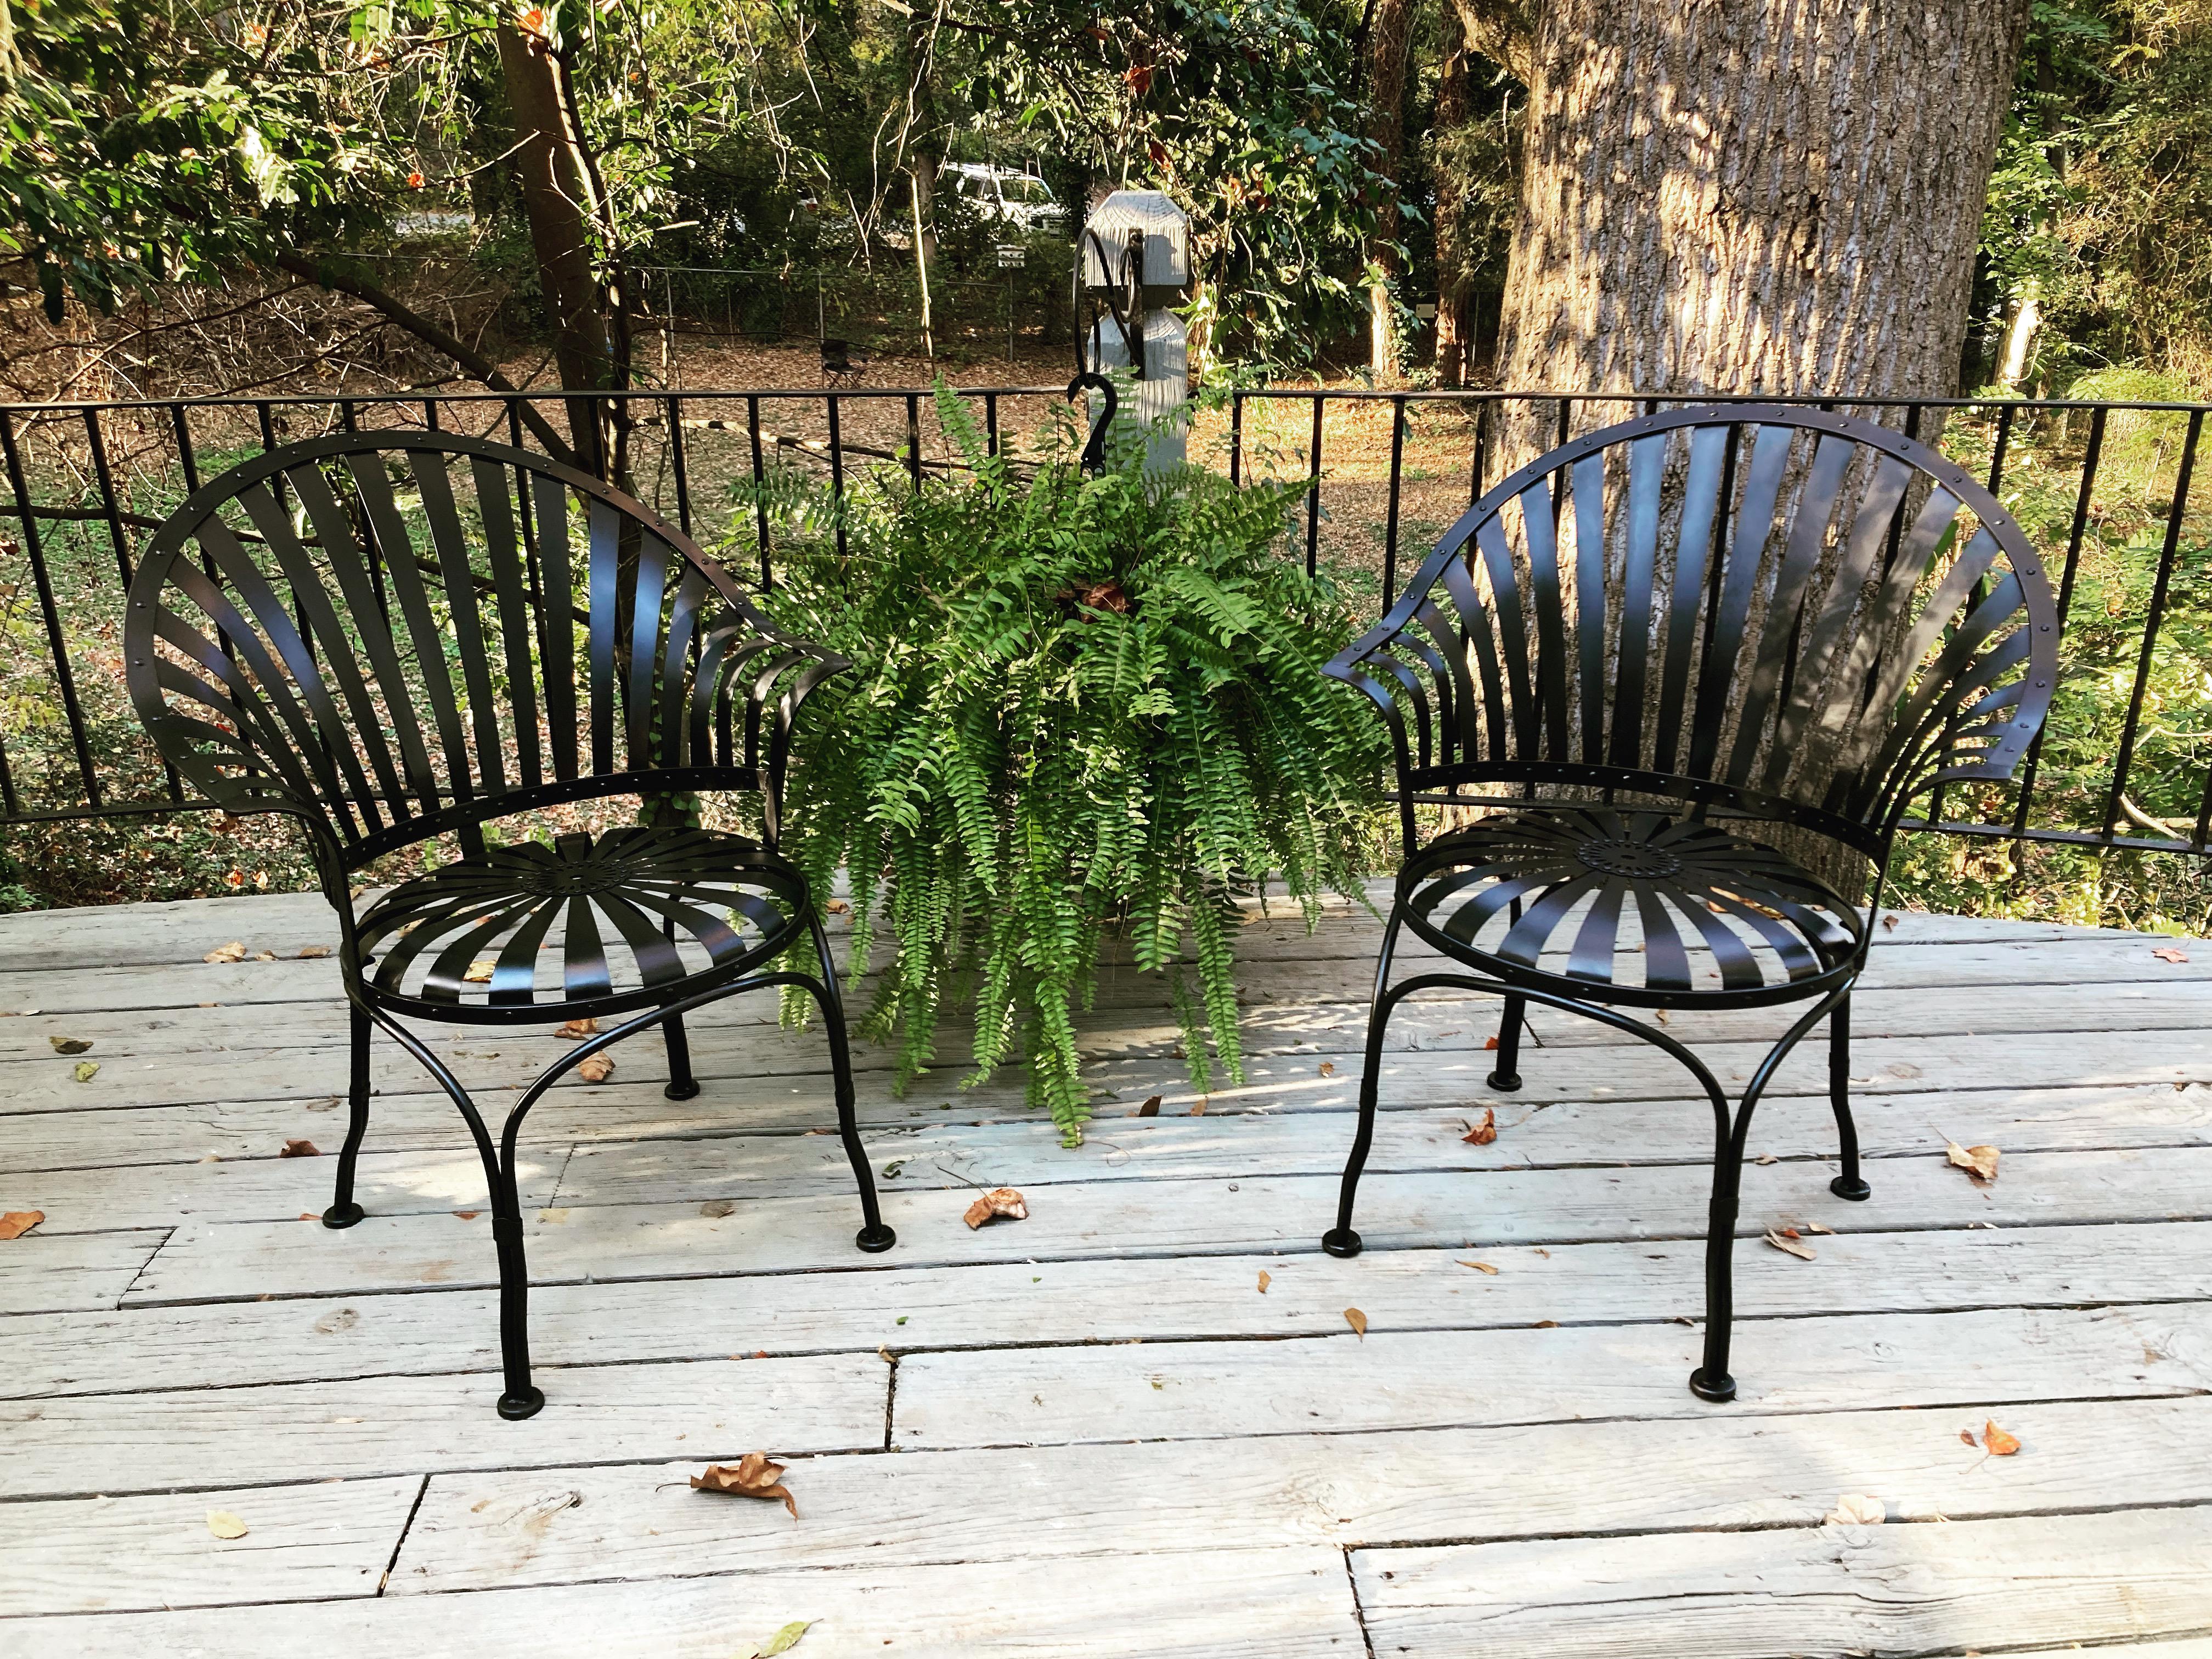 cool old hollywood glamorous duo, dating back to 1930. works for the patio or inside. super comfortable, spring sunburst seating
no maker’s mark
recently sandblasted, professionally primed and painted

26.75ʺW × 17.75ʺD × 34ʺH

shipping from athens,